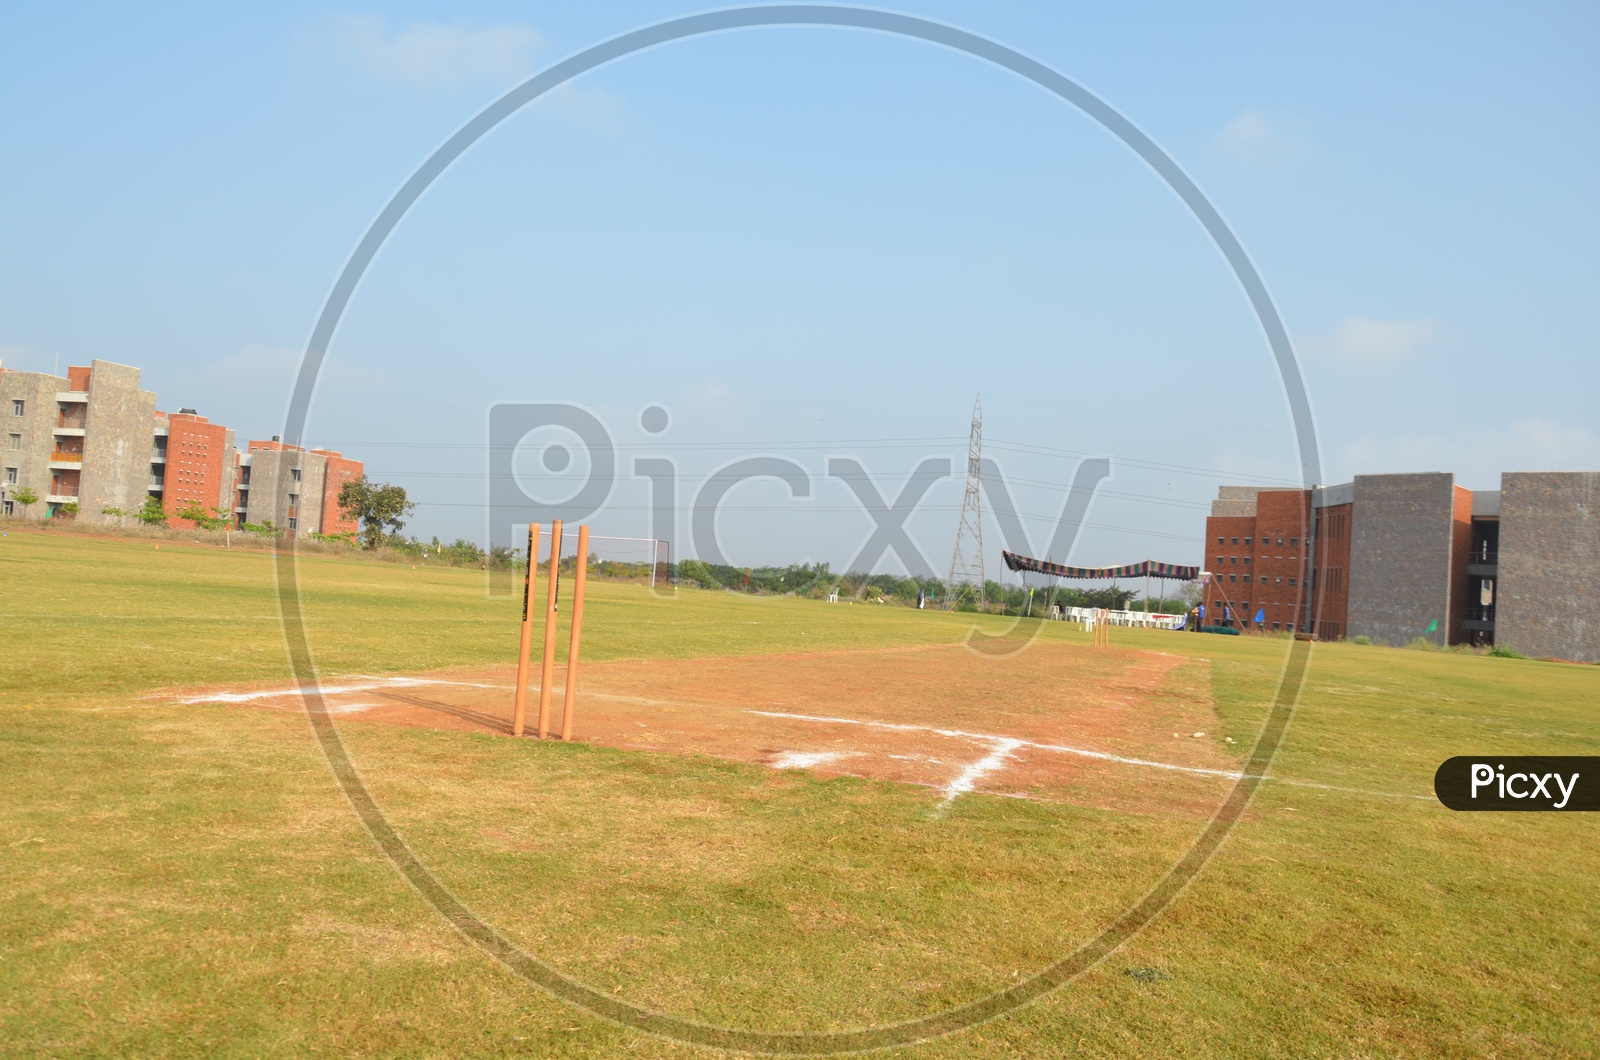 Cricket Stumps and Pitch